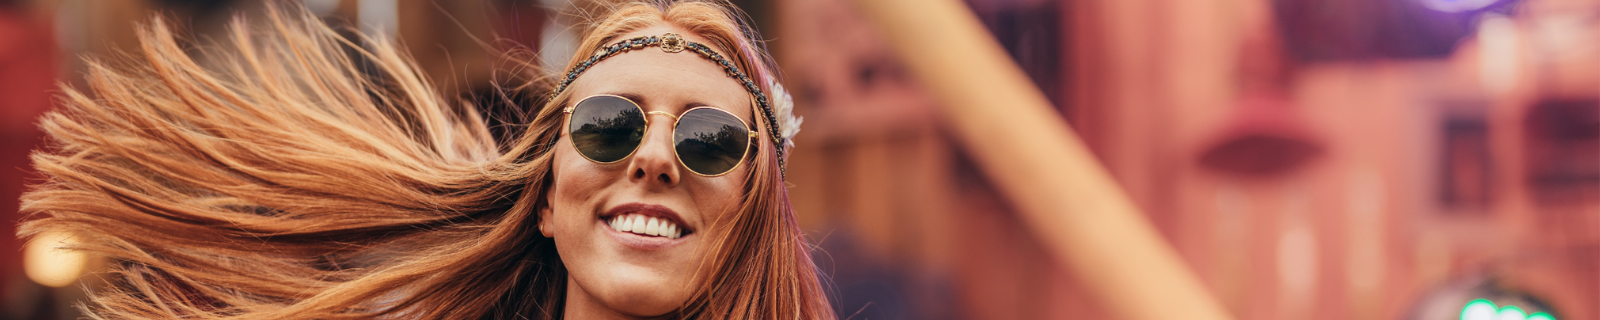 Red haired woman smiling with black sunglasses and a headband on